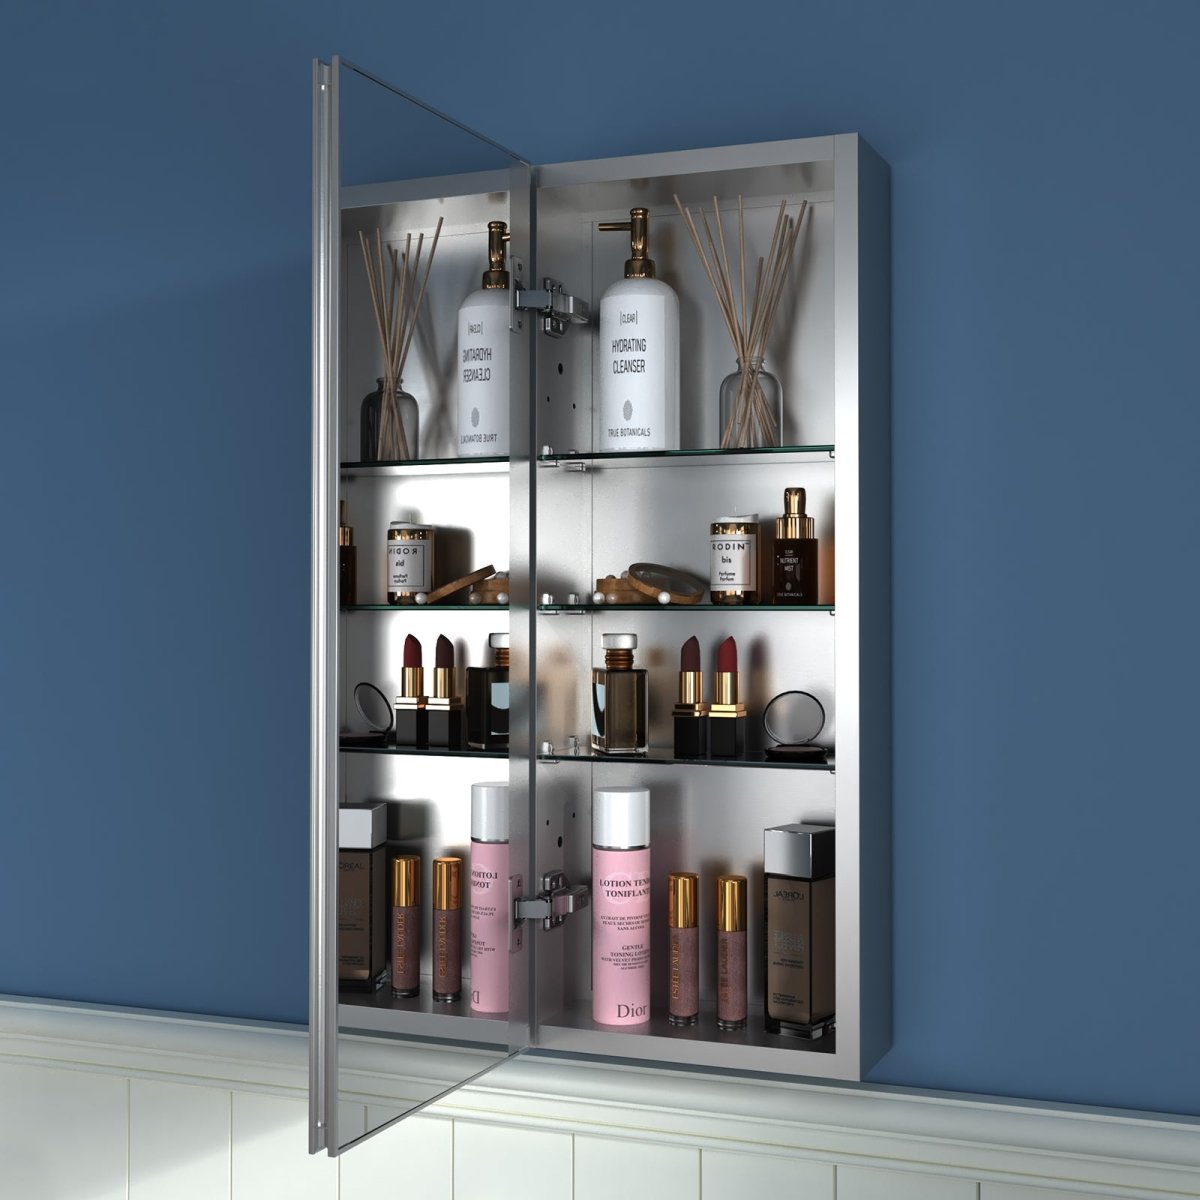 12 in. W X 36 in. H Single Medicine Cabinet without Light